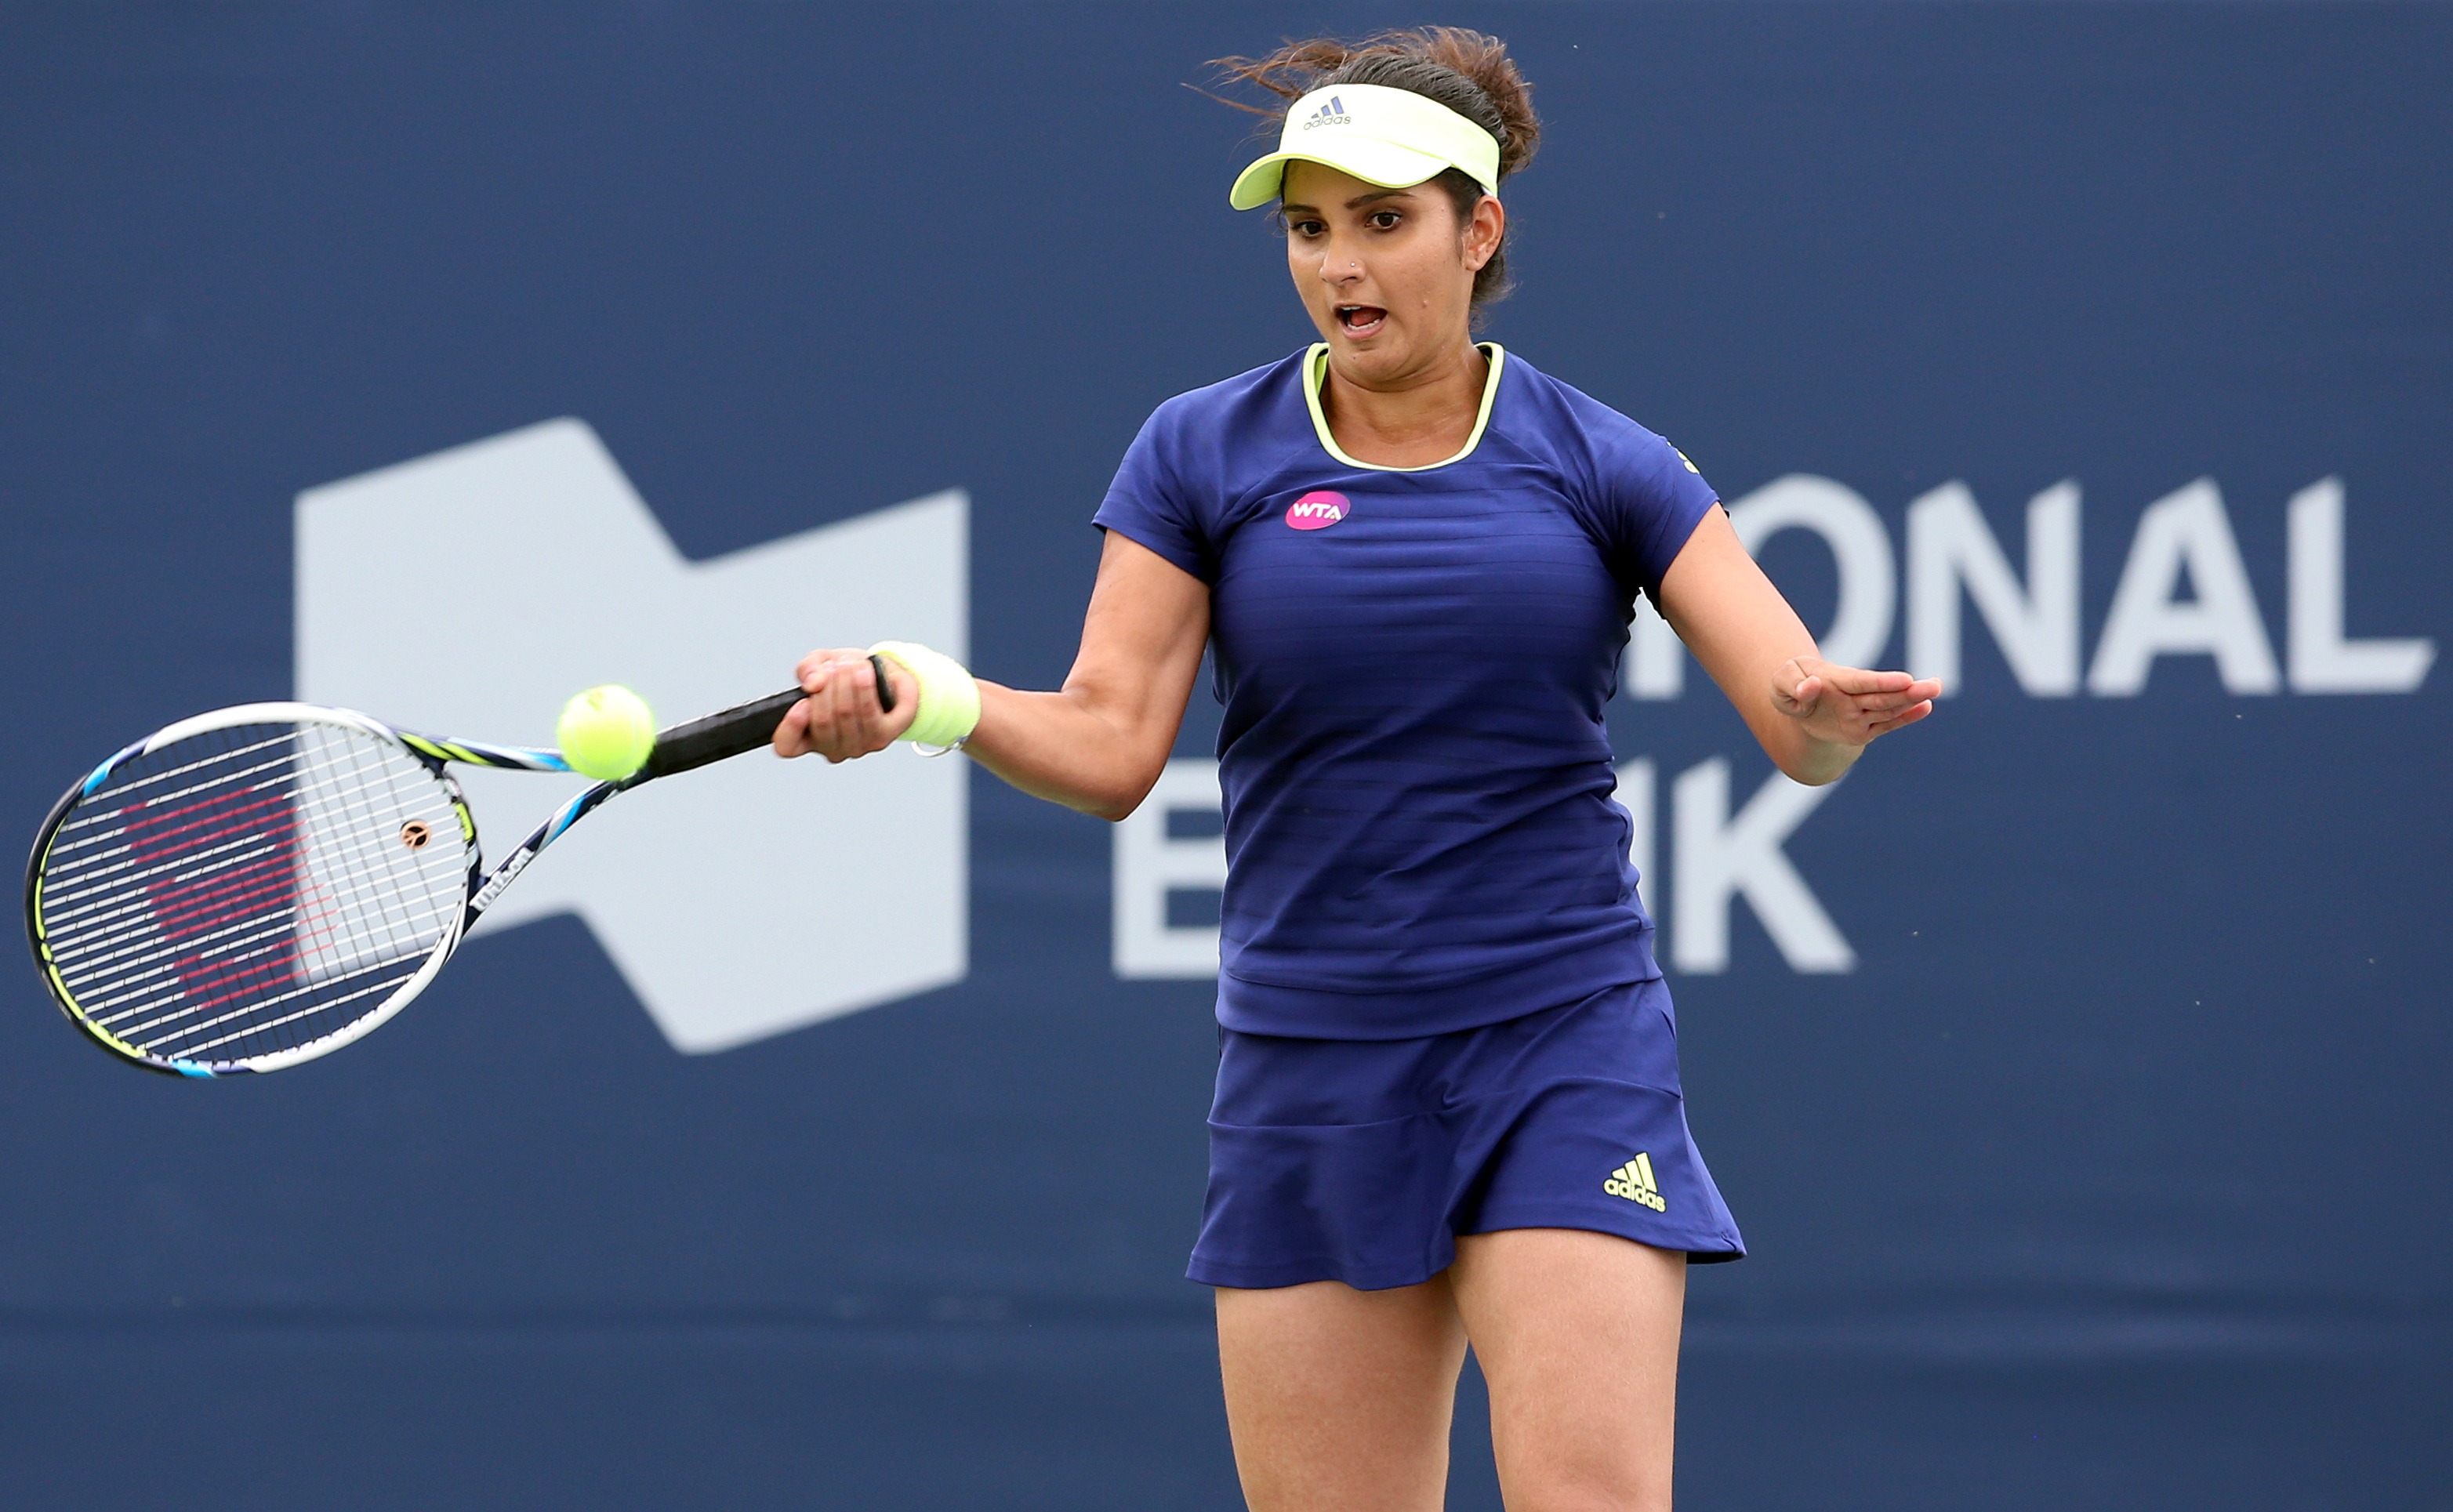 2021 Indian Wells Open | Sania Mirza - Zhang Shuai duo crashes out in the opening round